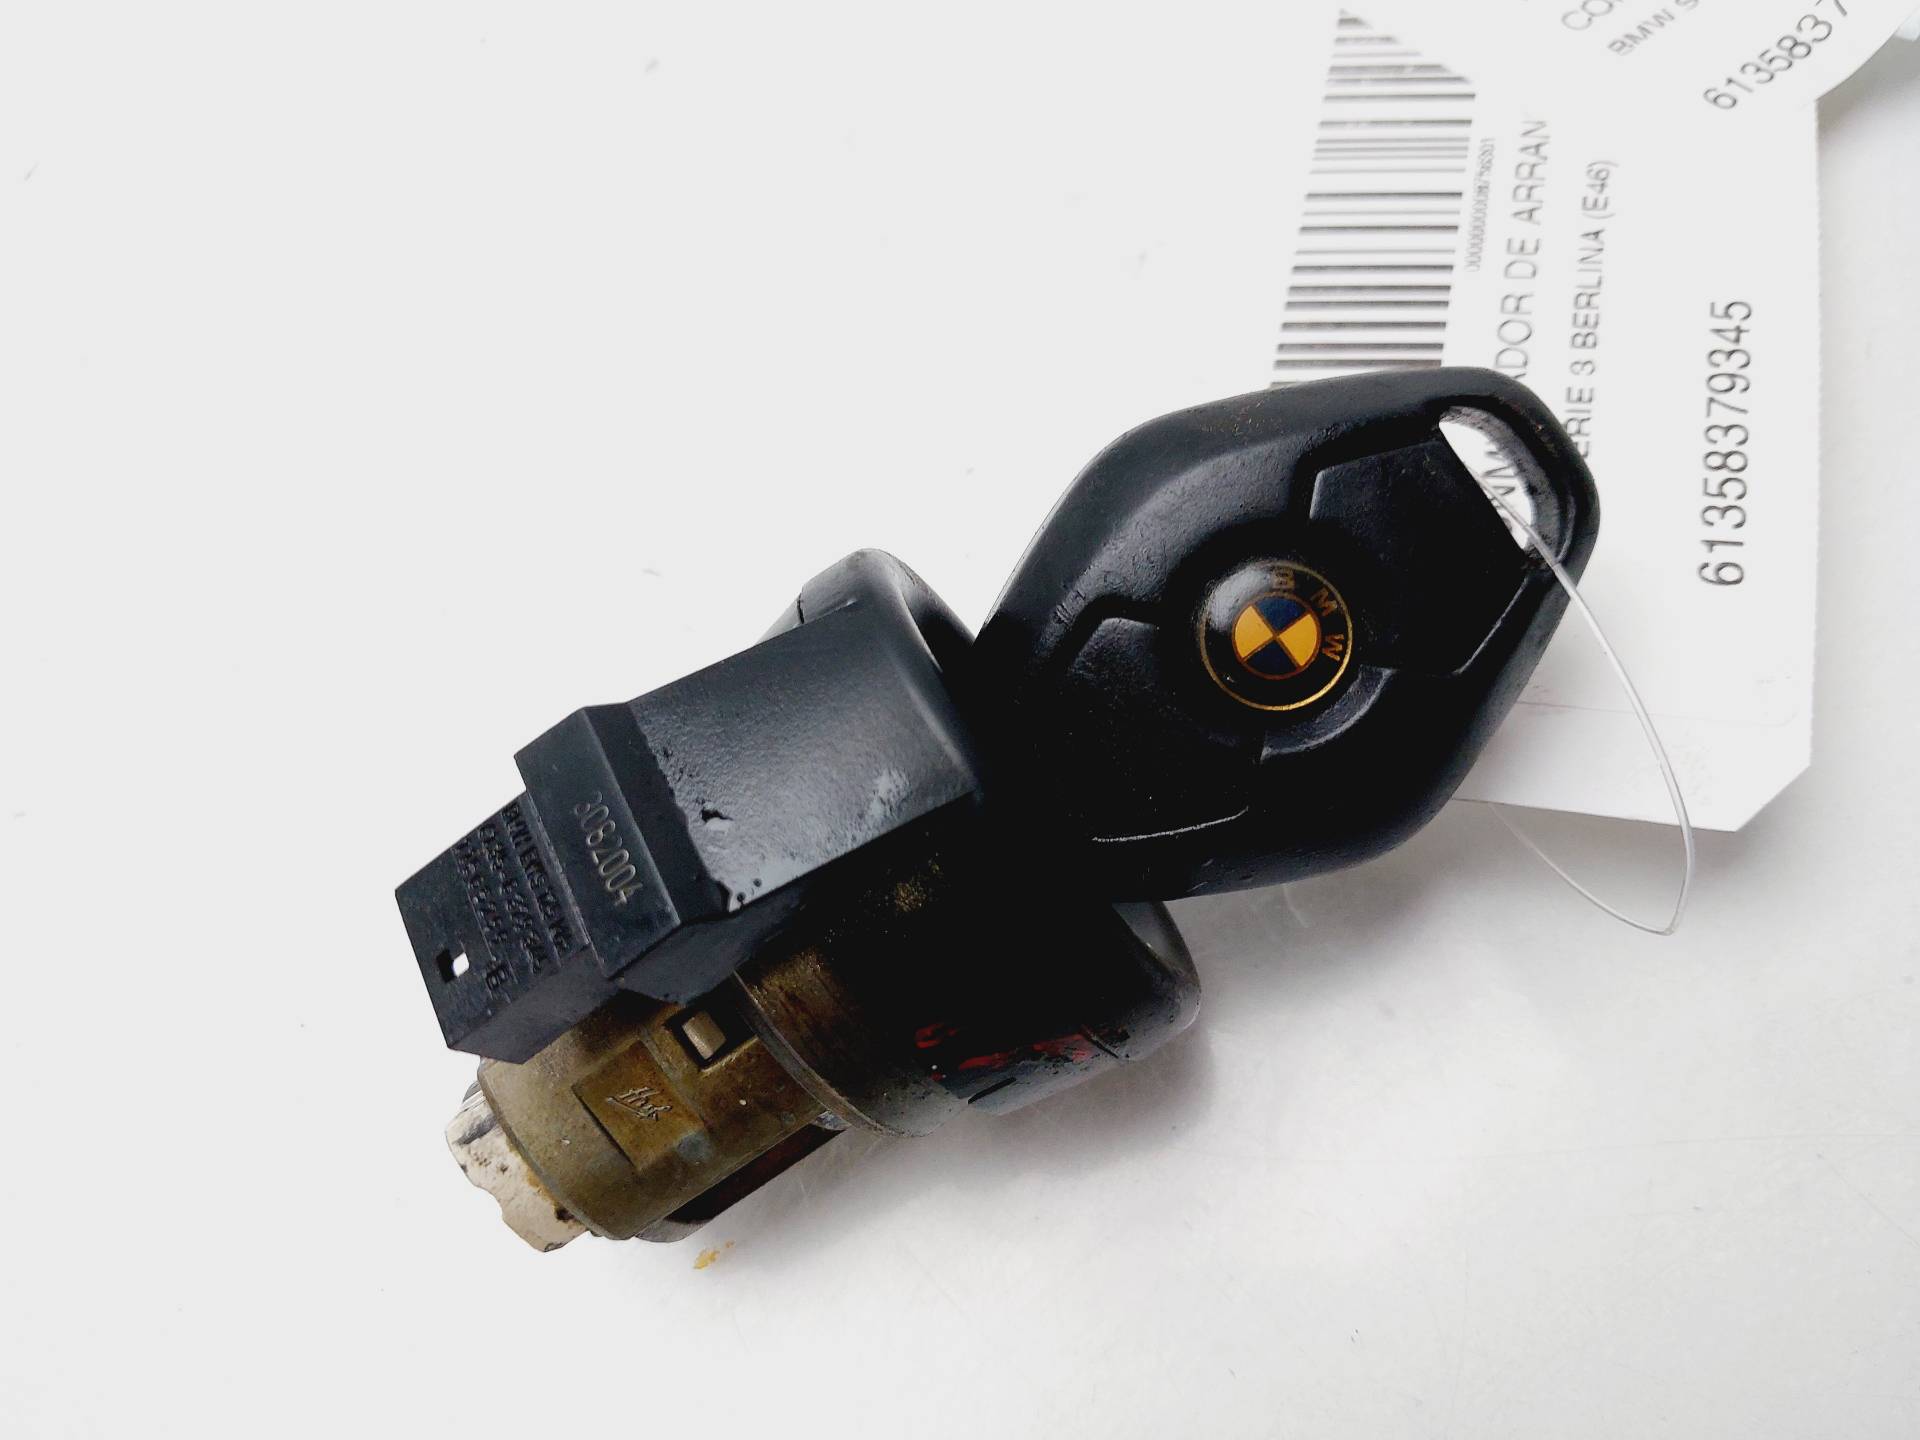 RENAULT 3 Series E46 (1997-2006) Ignition Lock 61358379345 25281699